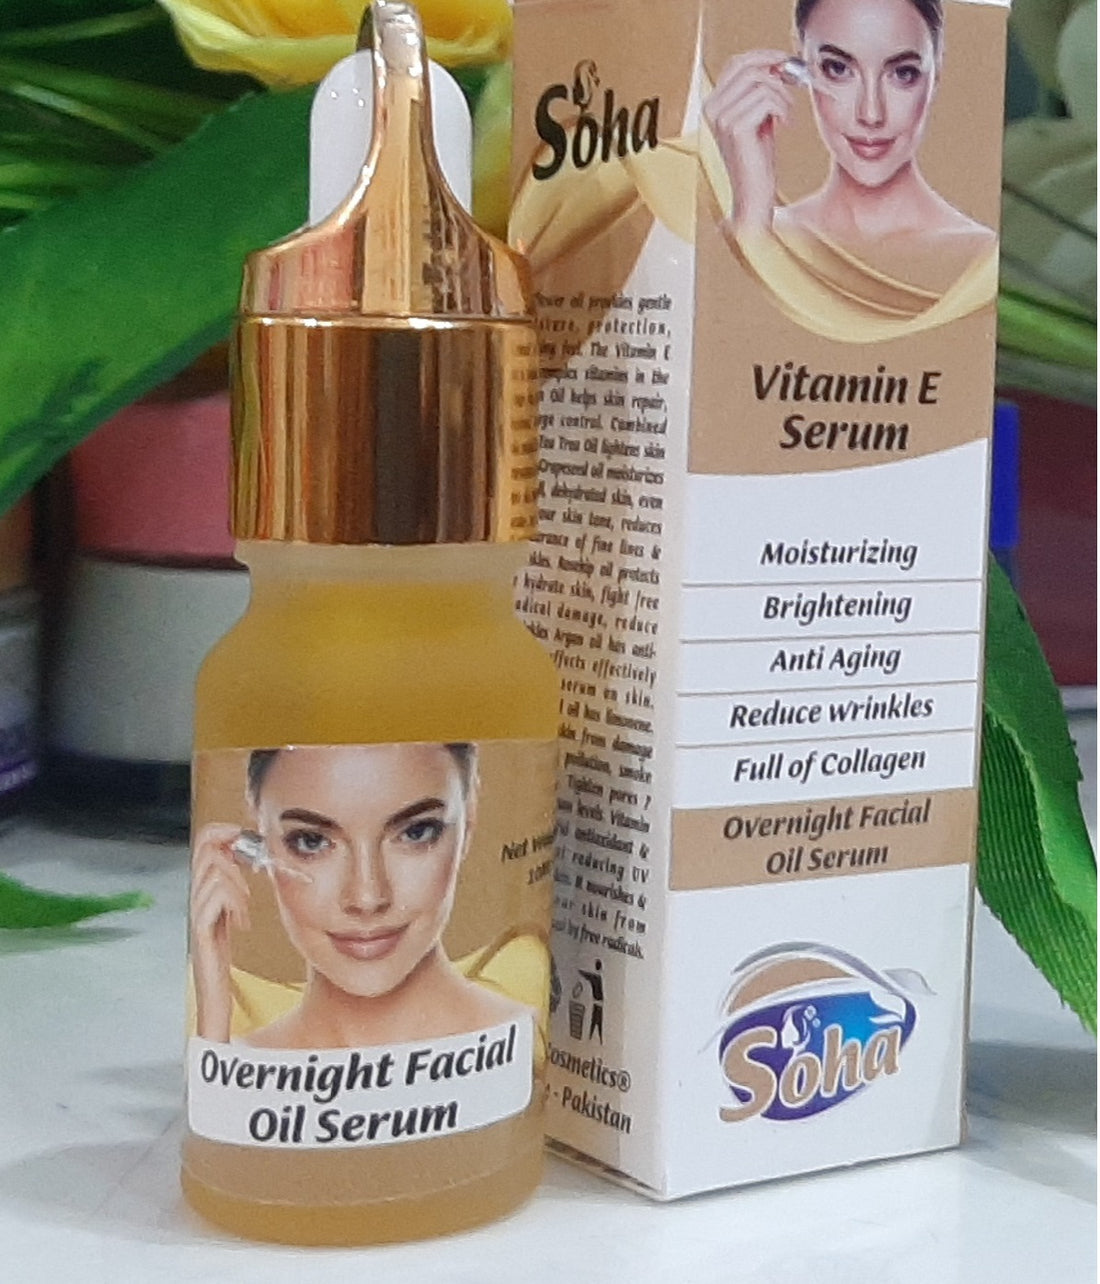 Benefits of using Vitamin E Serum for Face